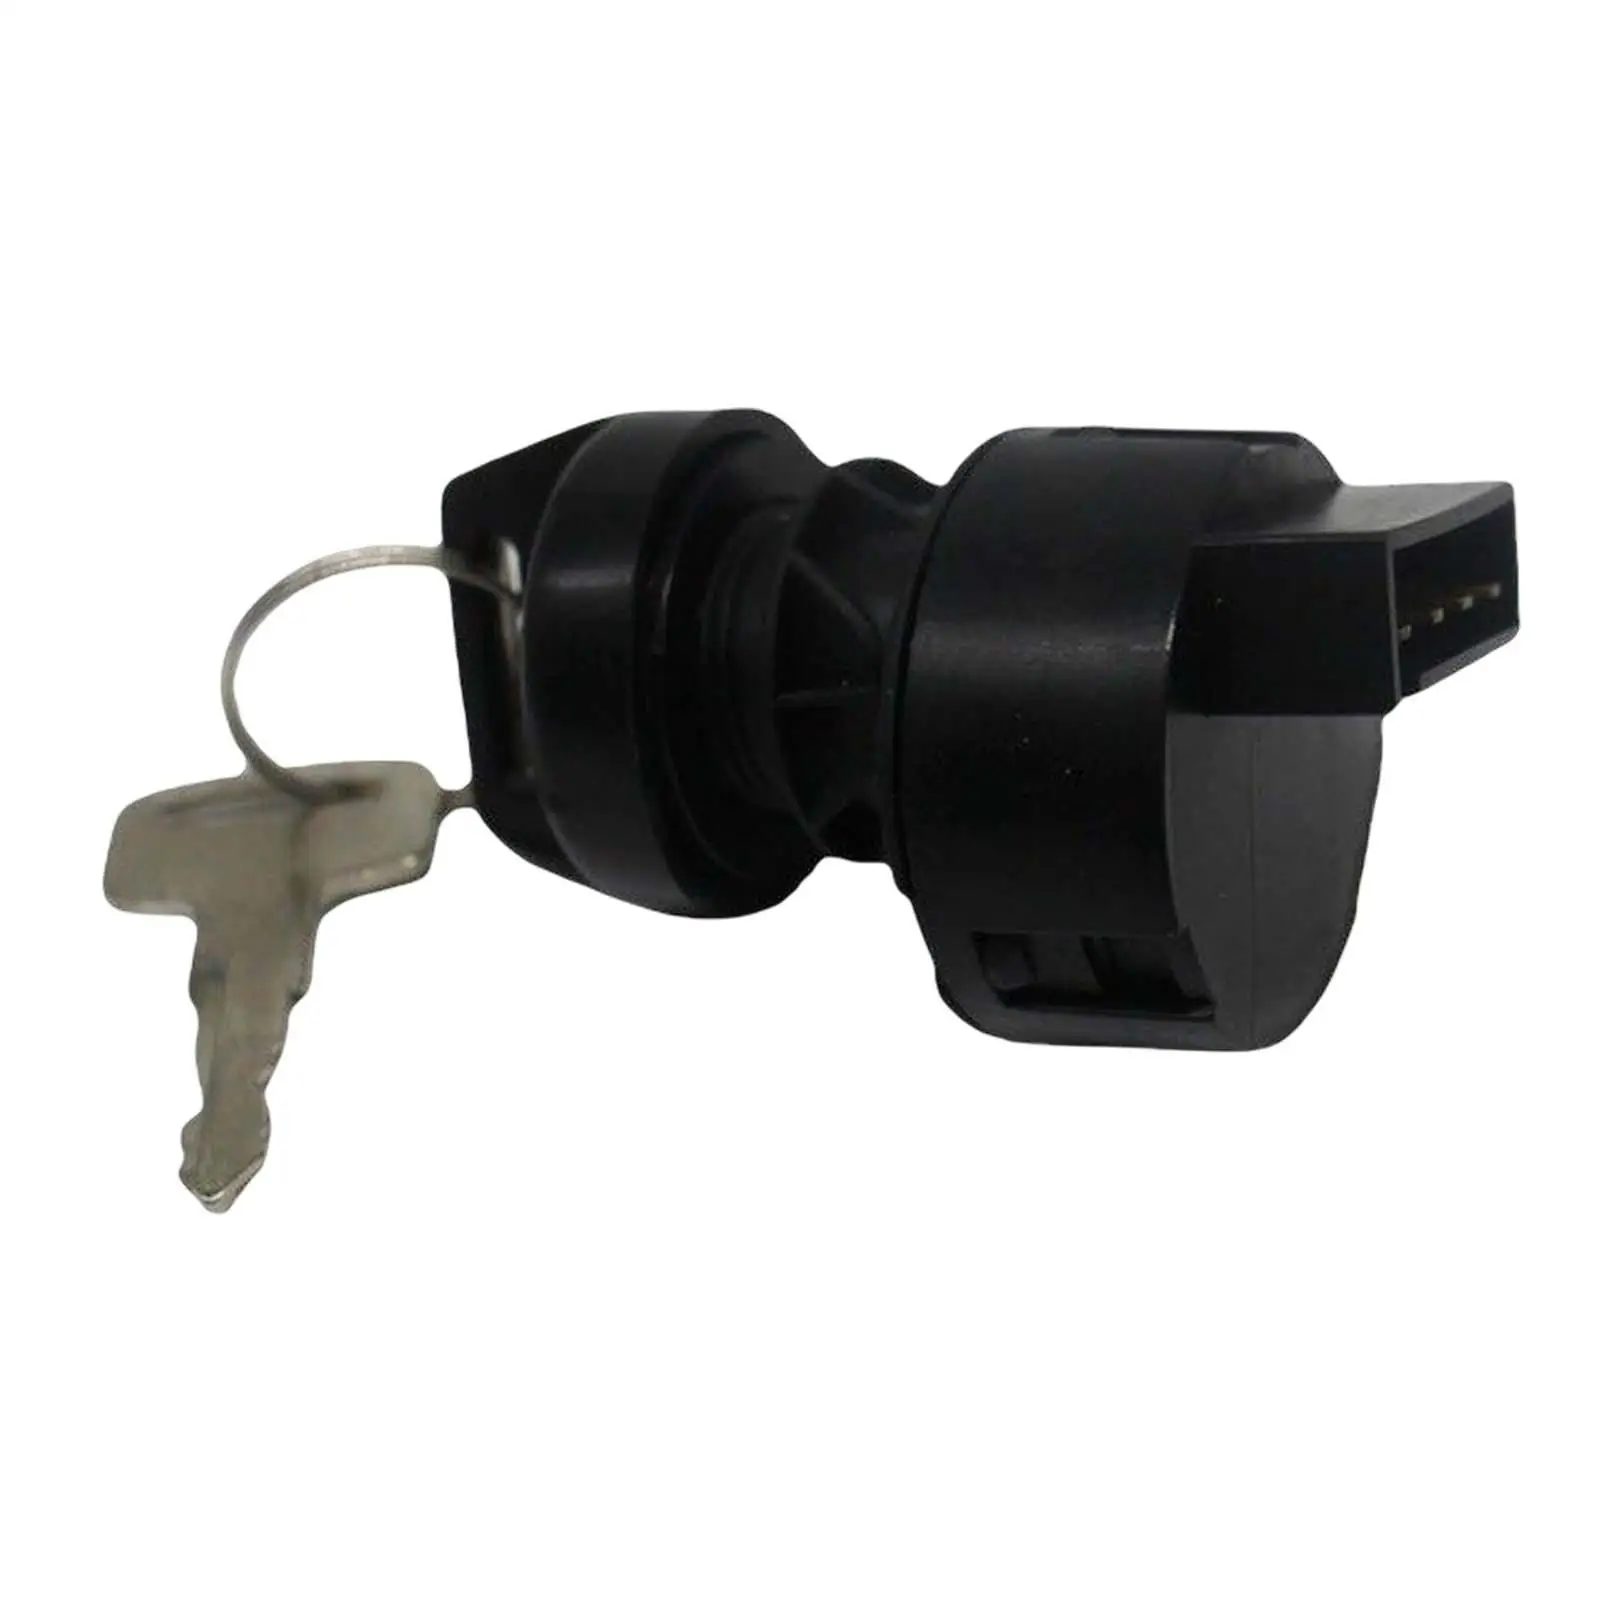 Ignition Switch Lock Replacement With 2 Keys For  Sportsman 335 400 500 600